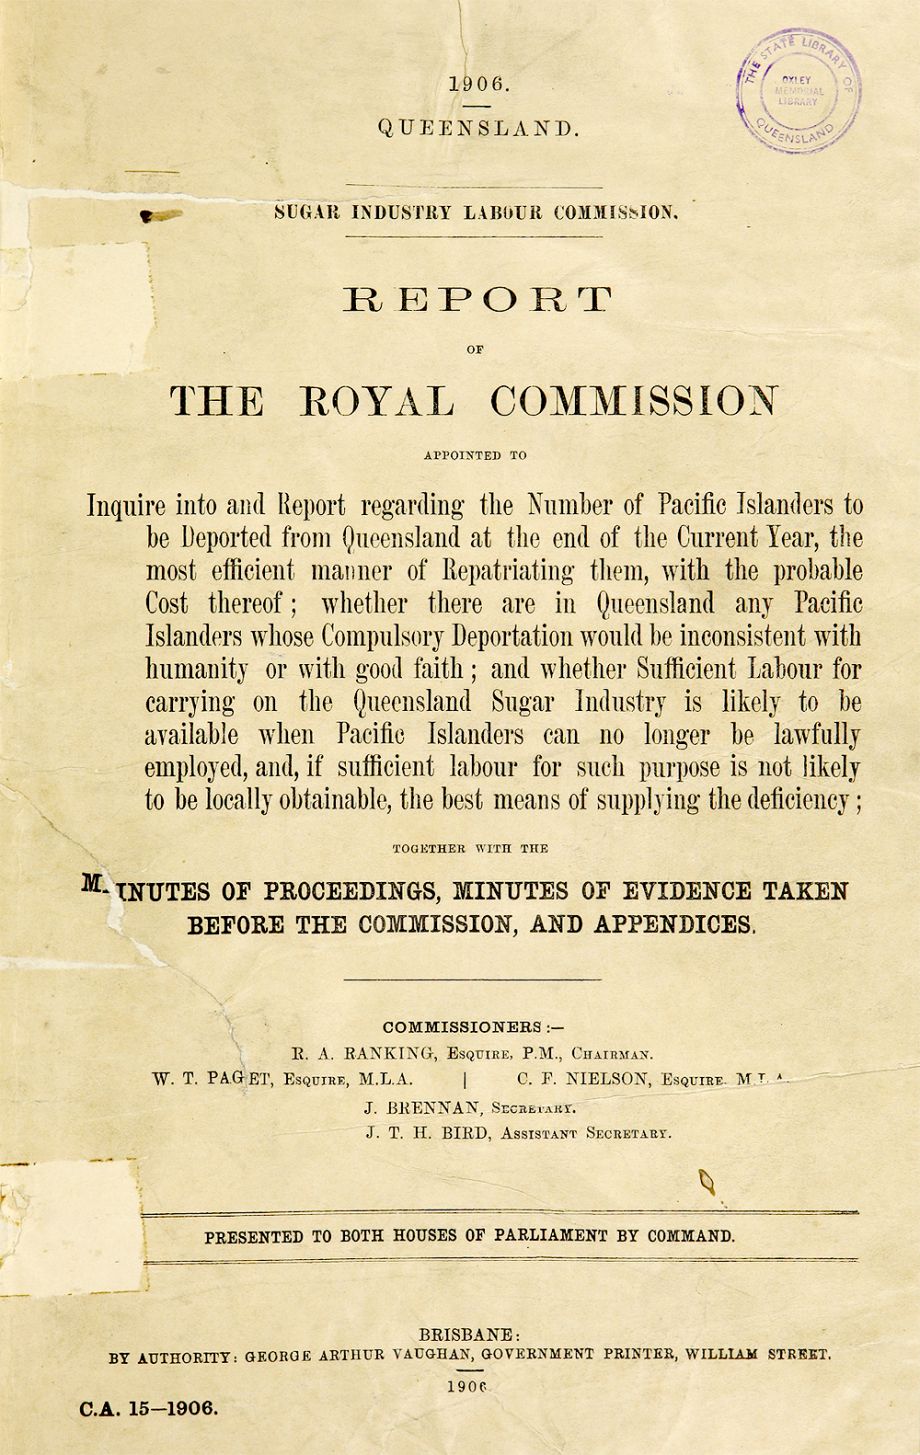 1906 Sugar Industry Labour Commission. Report of the Royal Commission appointed to inquire into and report regarding the number of Pacific Islanders. R. A Ranking (Robert Archibald), 1843-1912. Brisbane : George Arthur Vaughan, Government Printer :1906. 